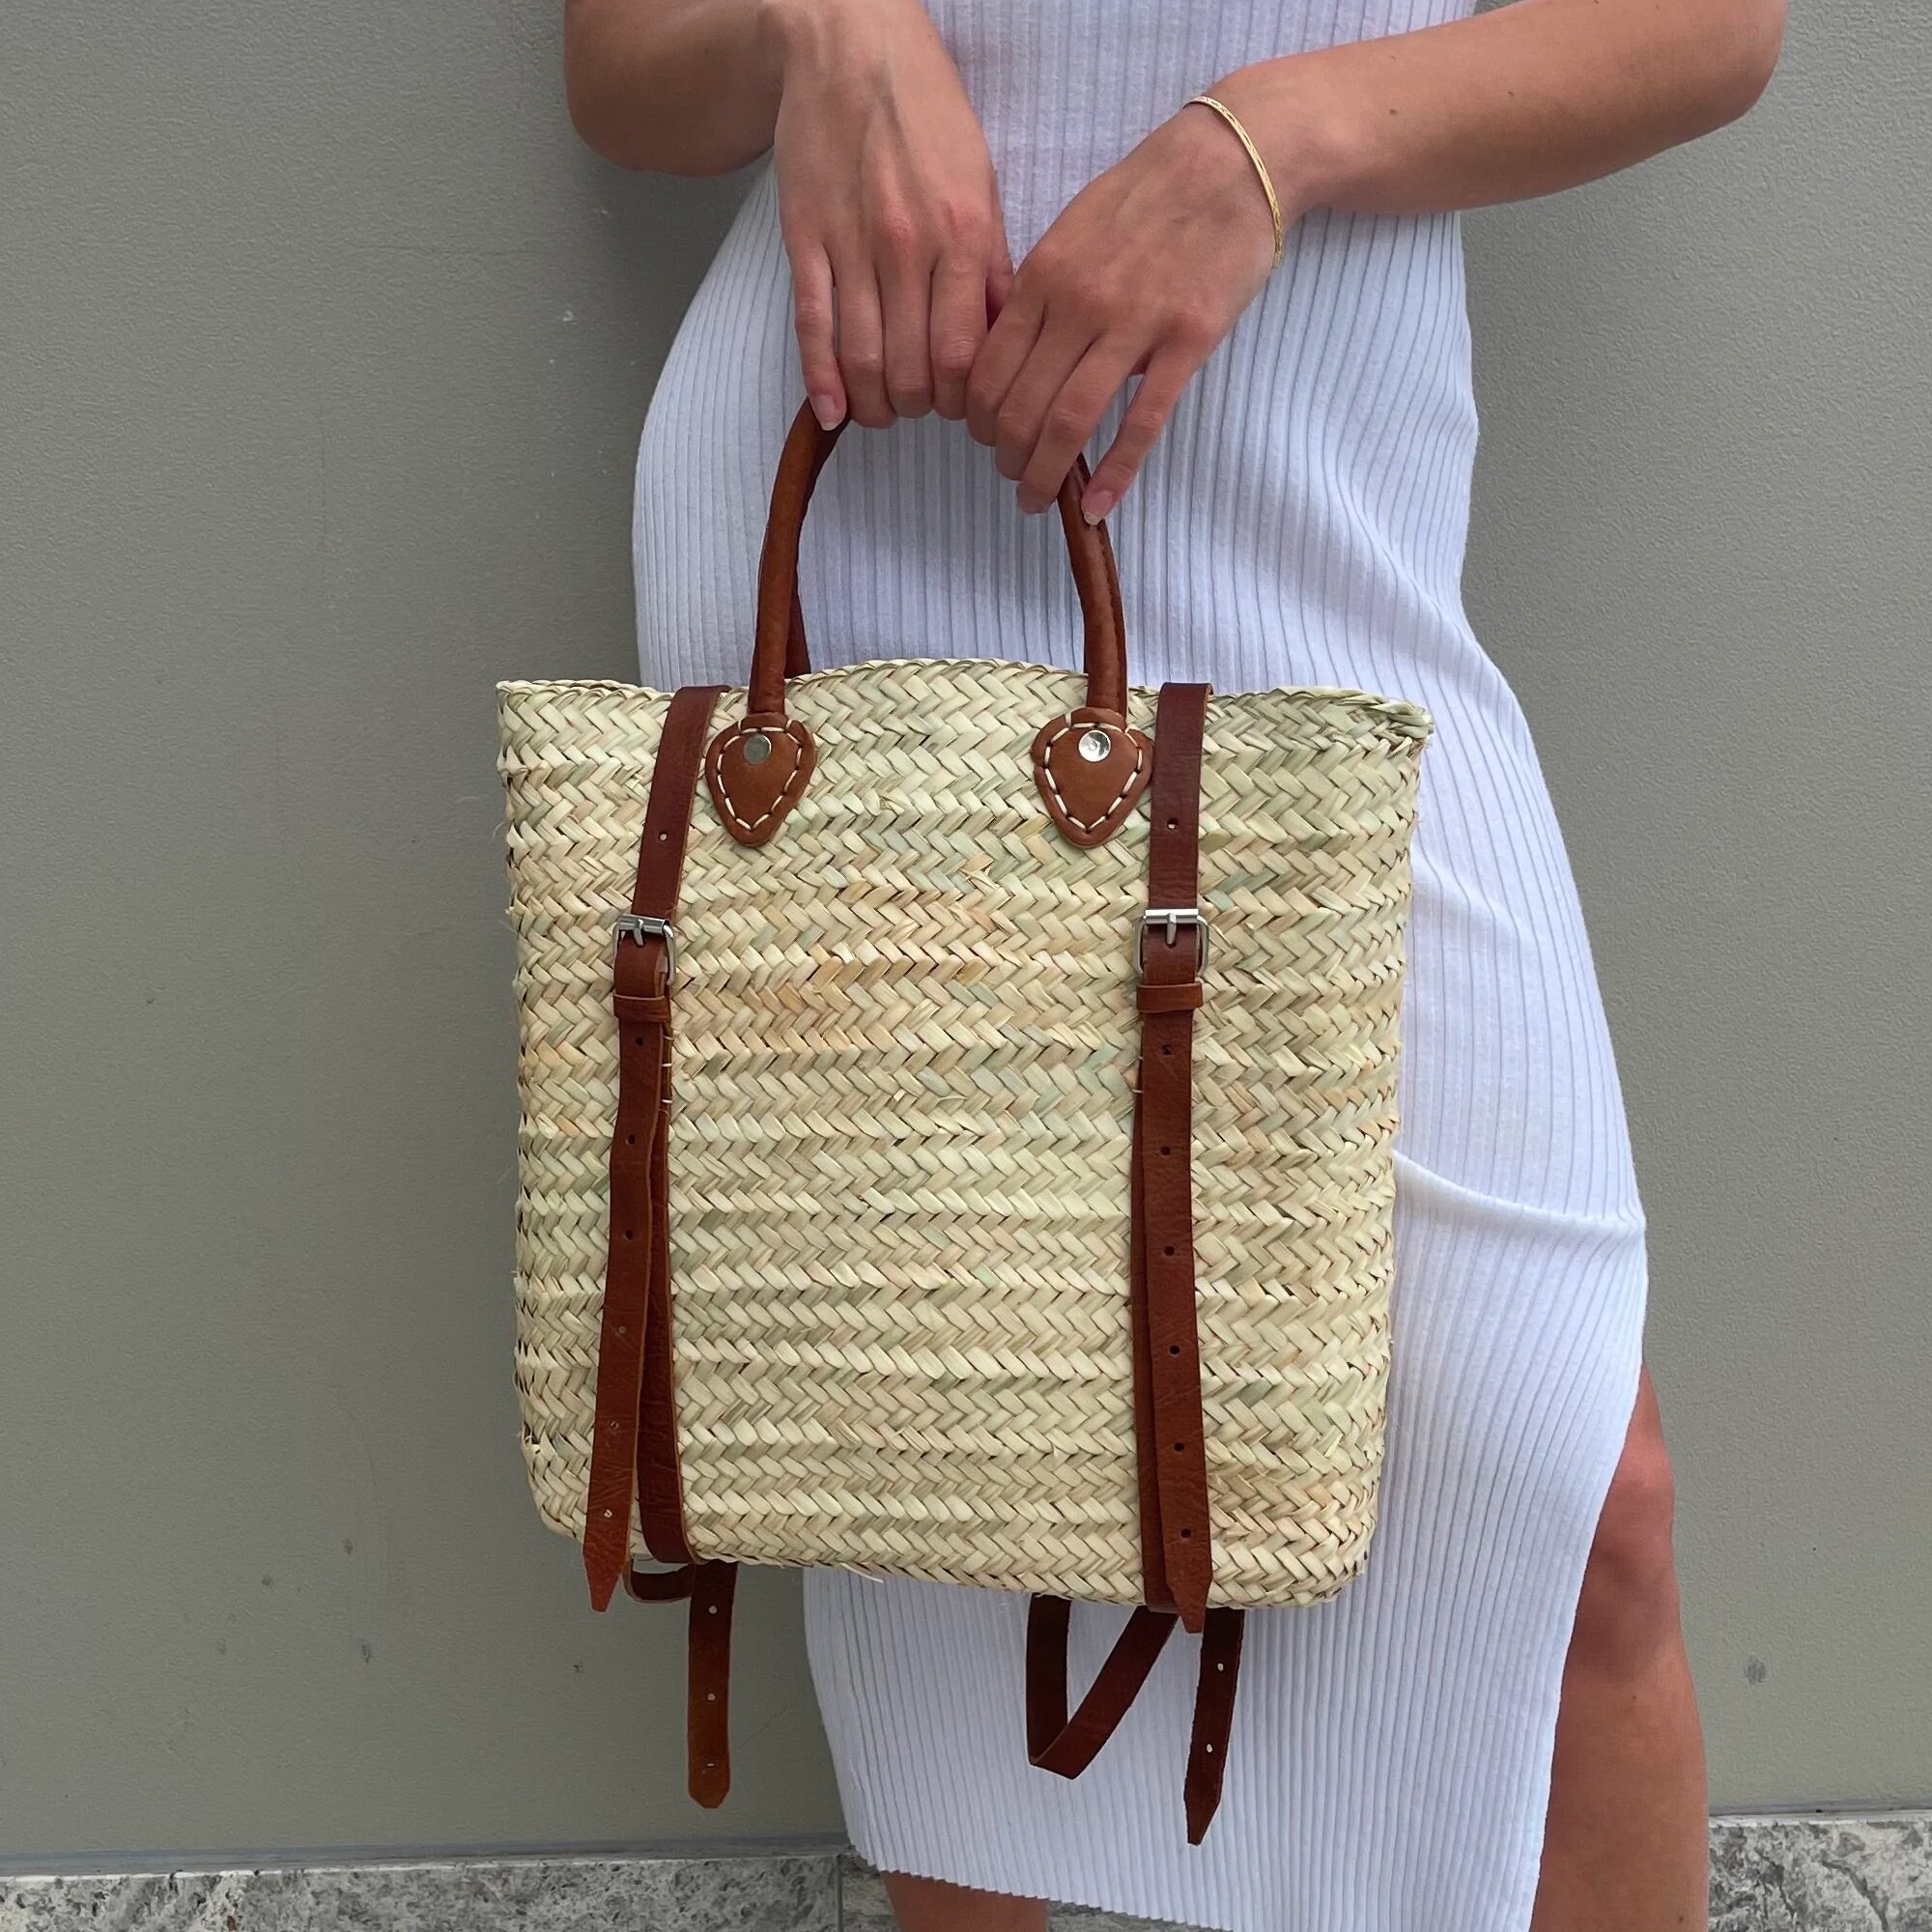  French basket backpack with leather strap,Carry Sunshine  Everywhere, Straw backpack, Beach bag, Hipster backpack, straw basket,  summer bag : Handmade Products